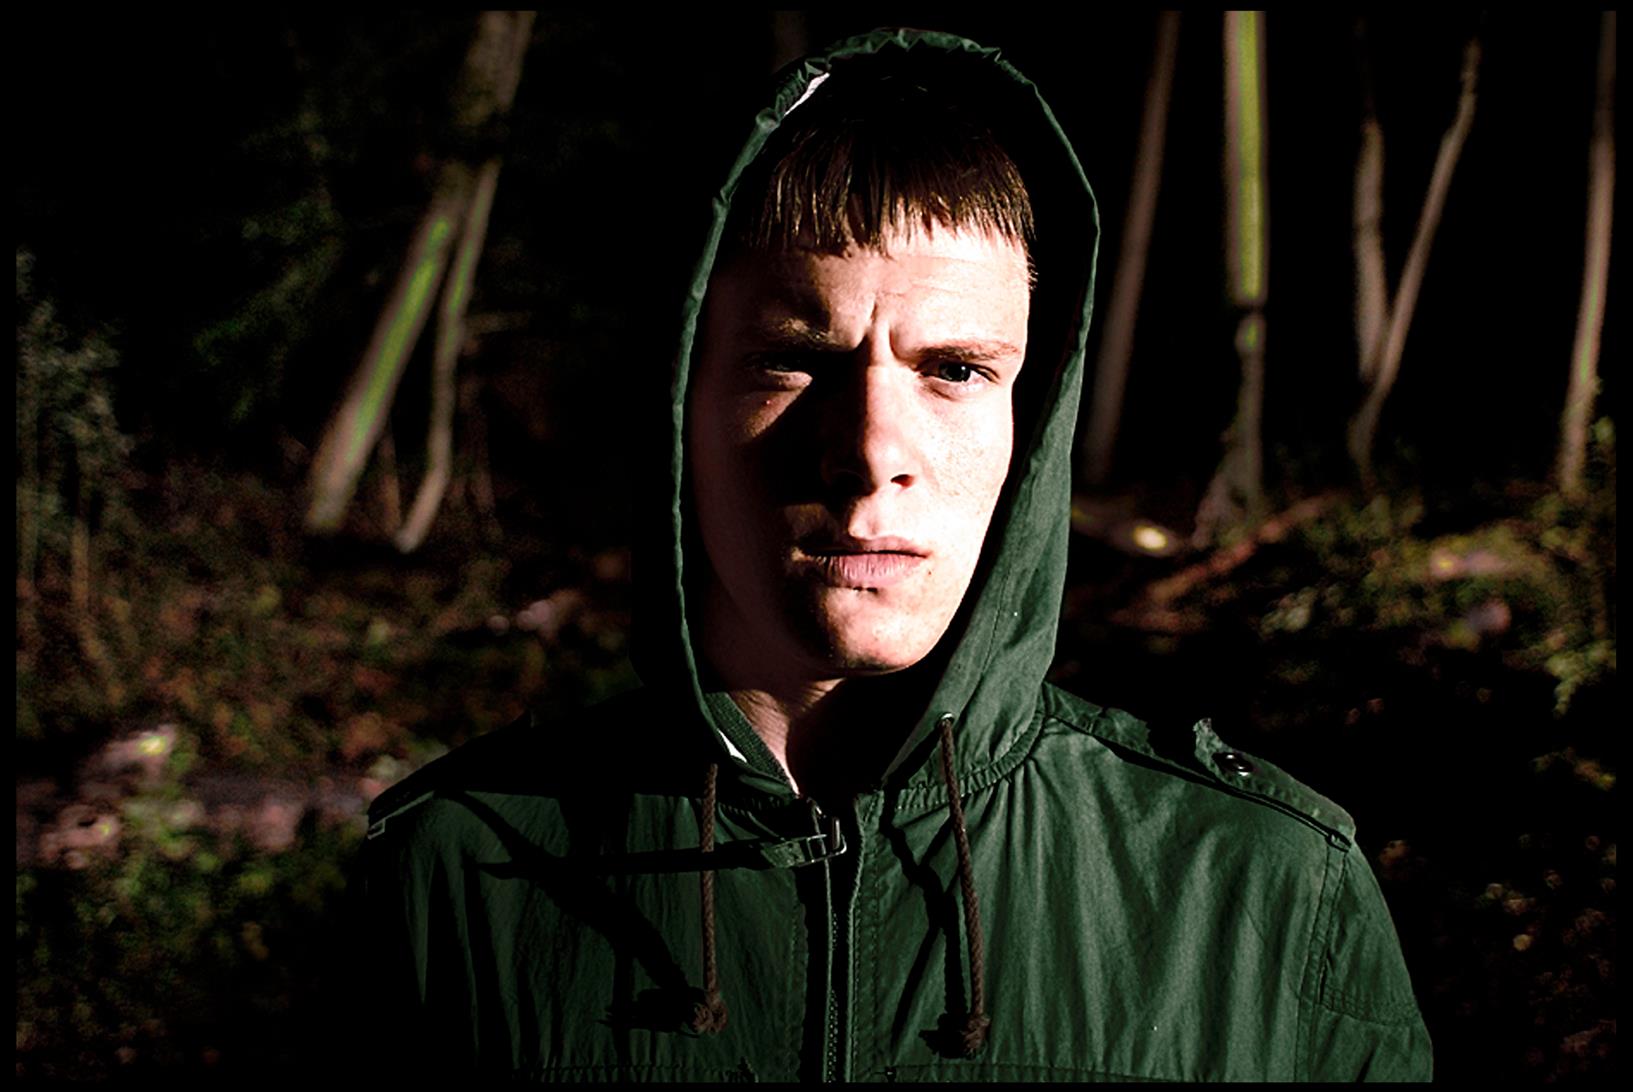 Eden Lake And The British 'Hoodie Horror' Genre: How They Reinforced Policies To Demonise The Working Class